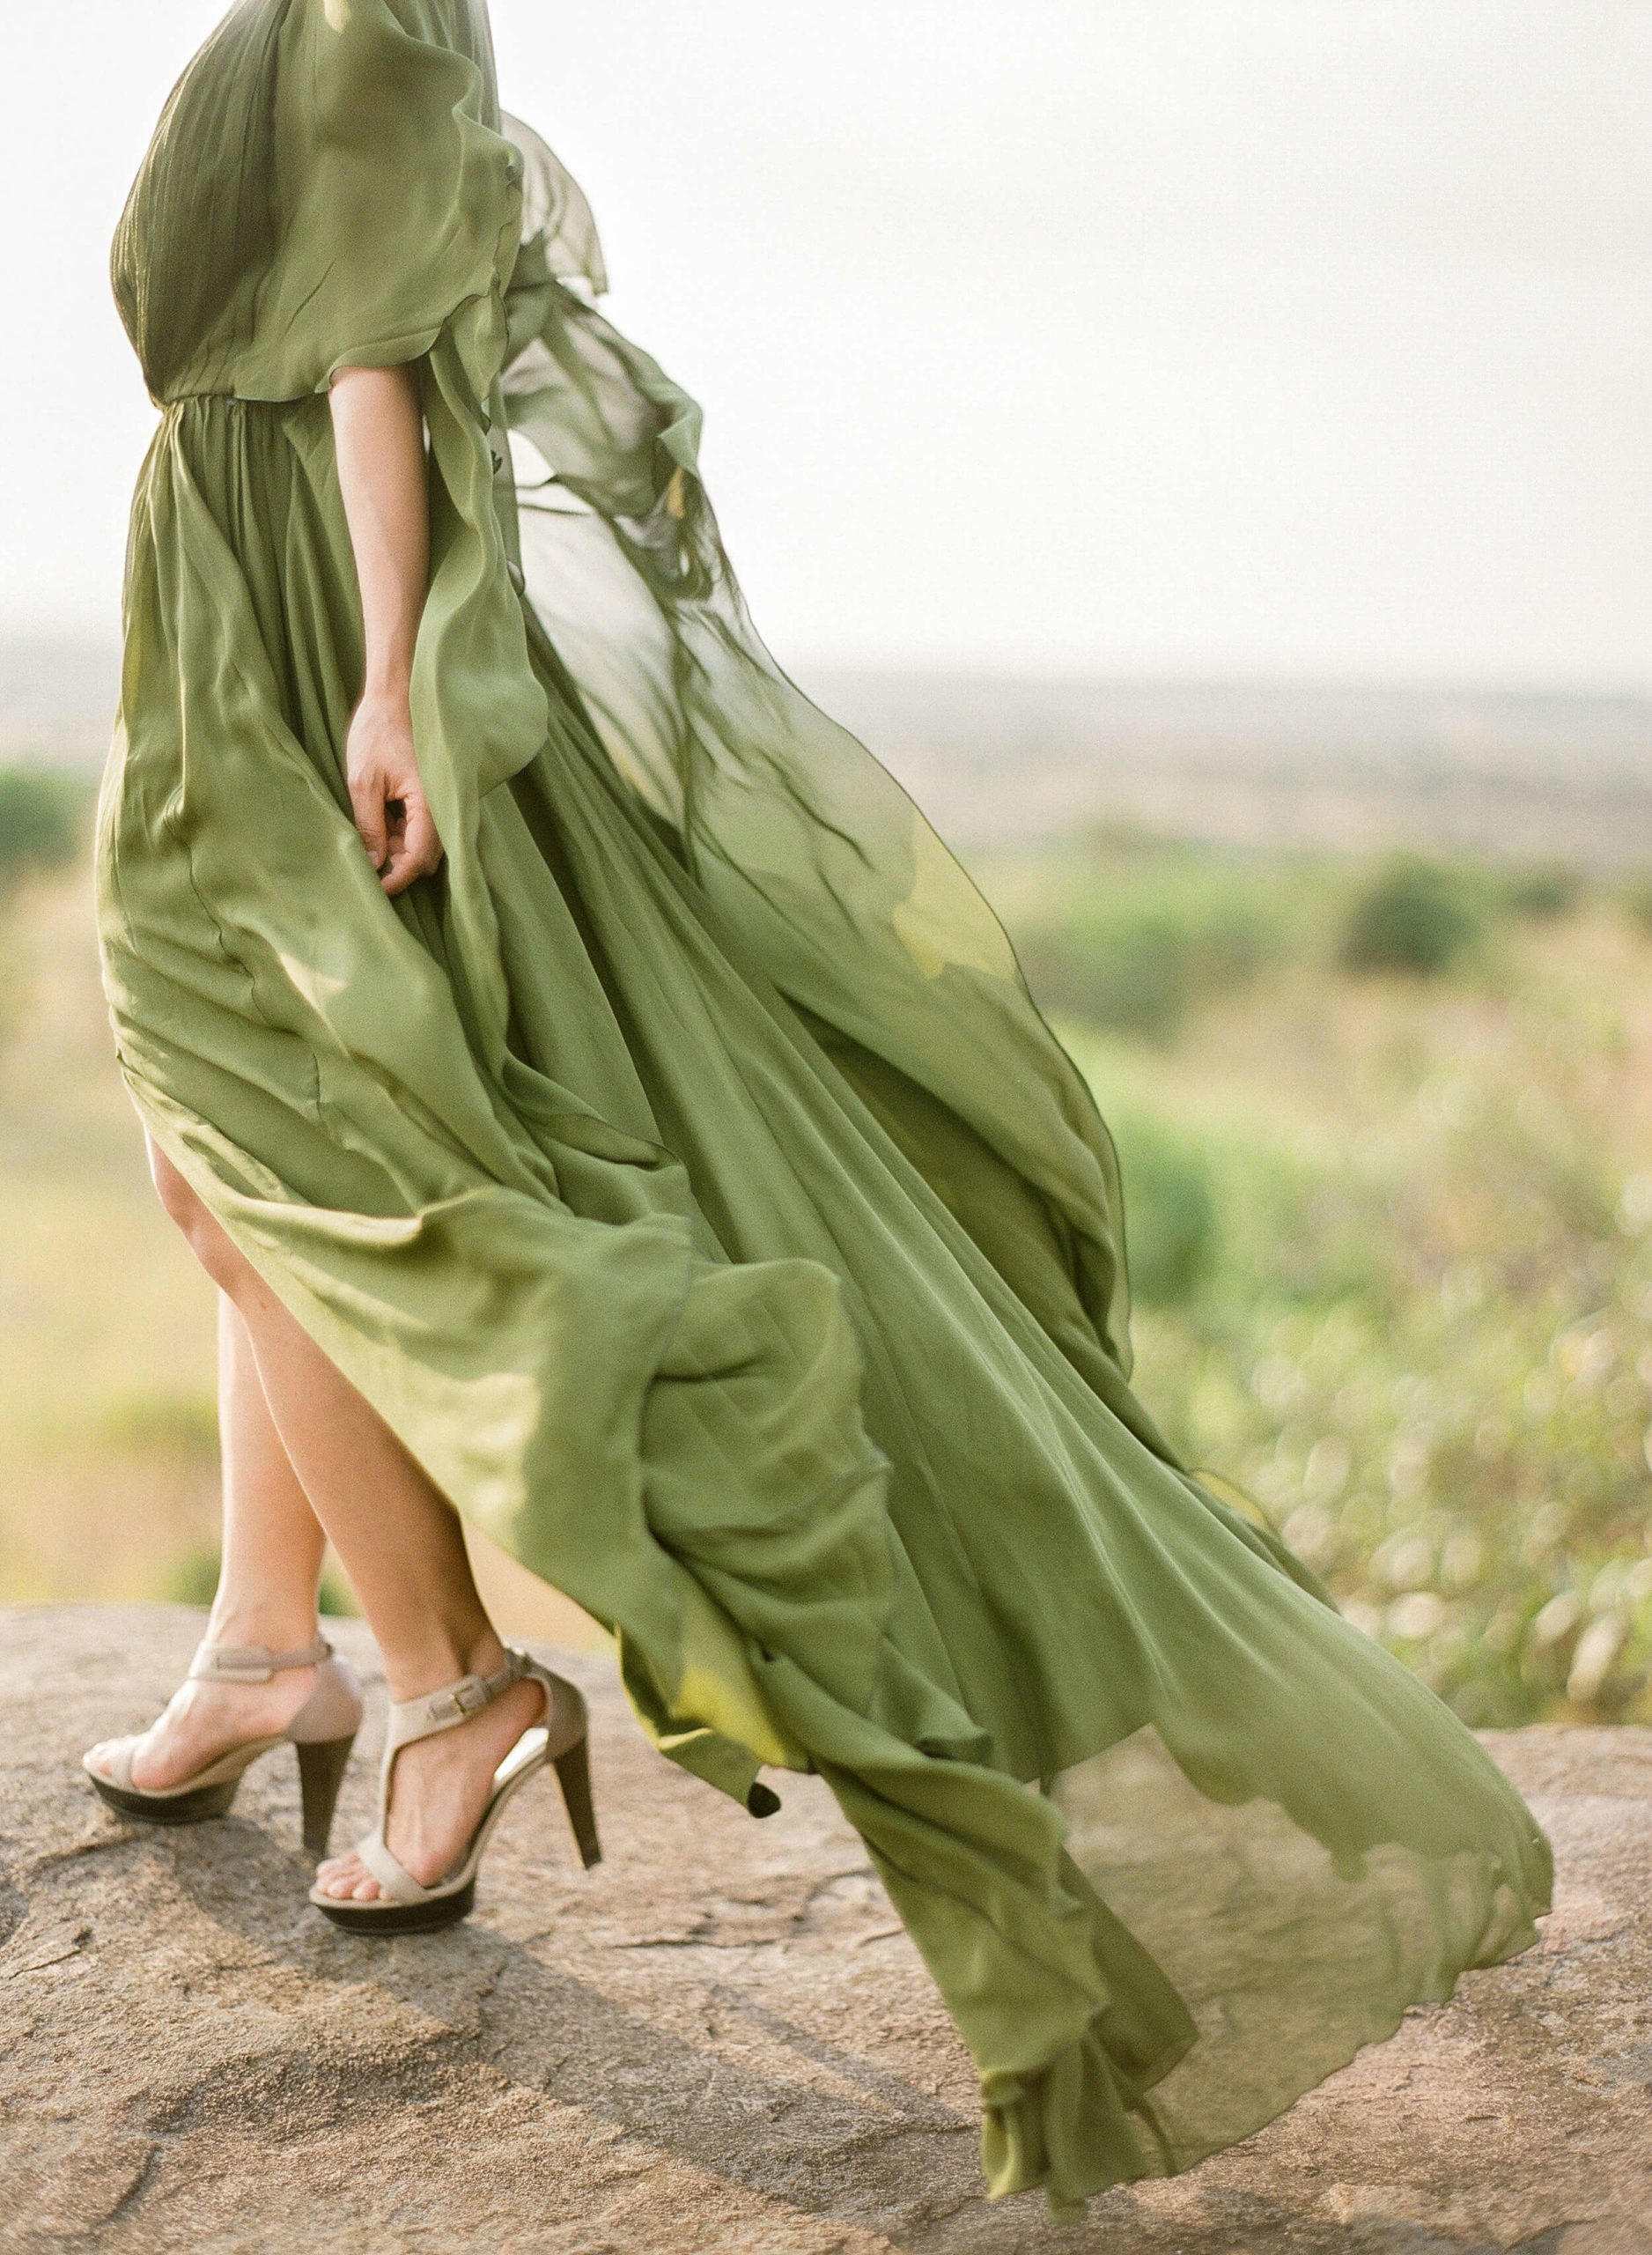 green flowing gown in African landscape